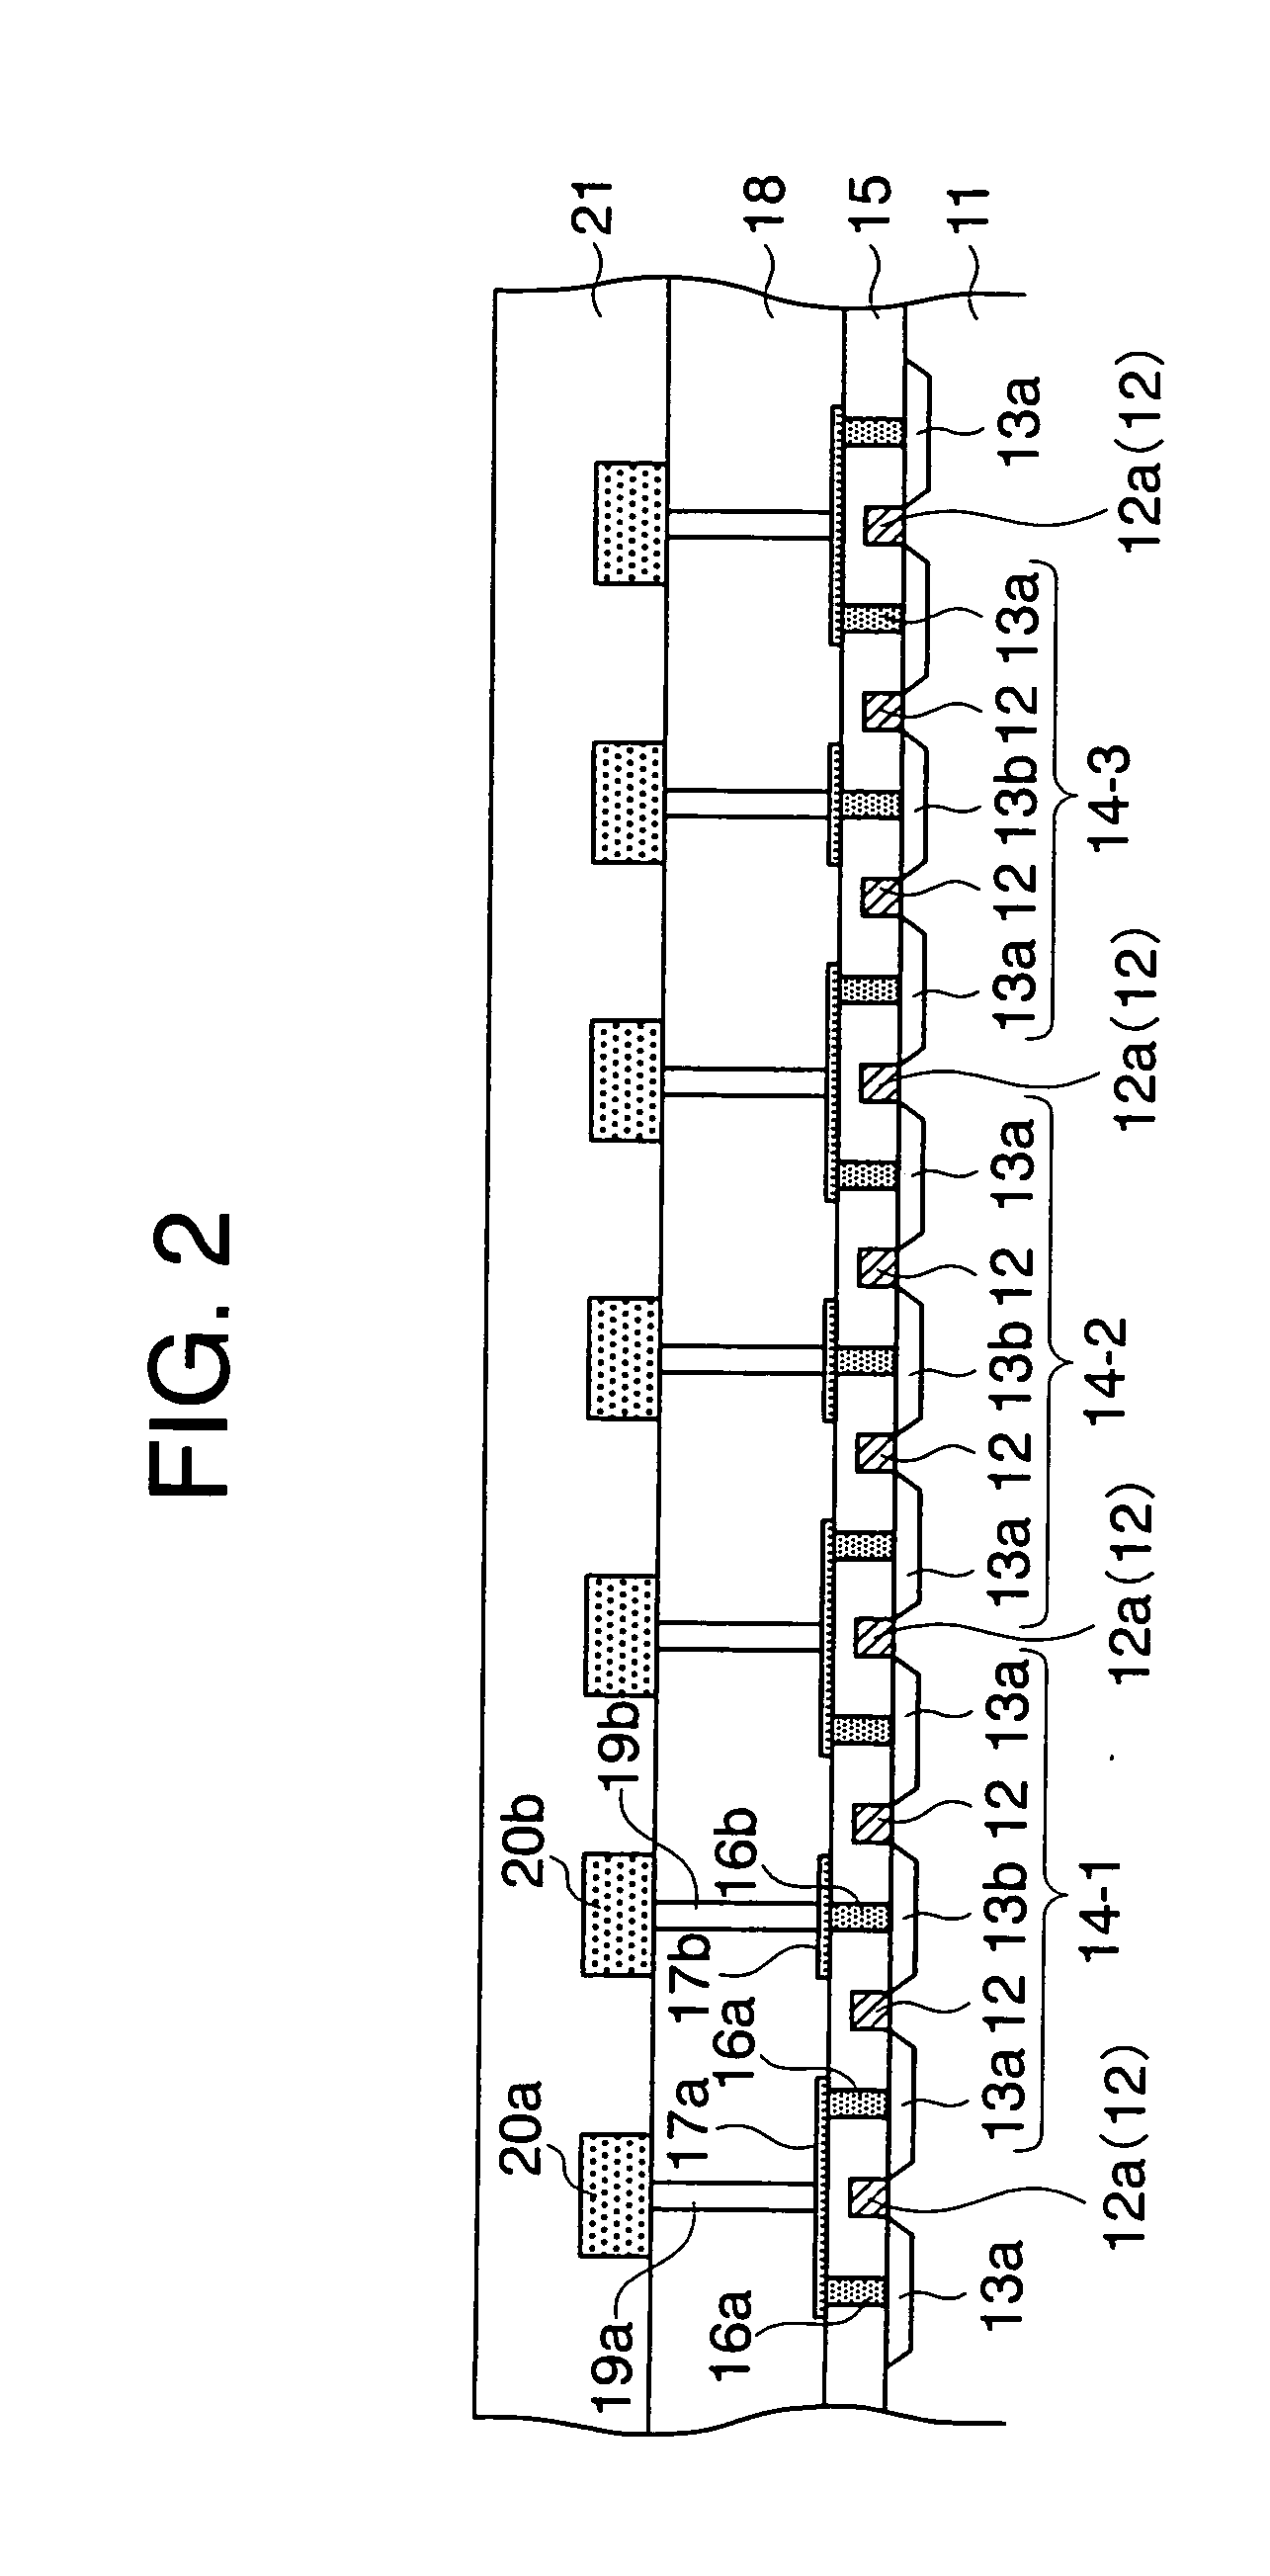 Semiconductor device having a dummy gate